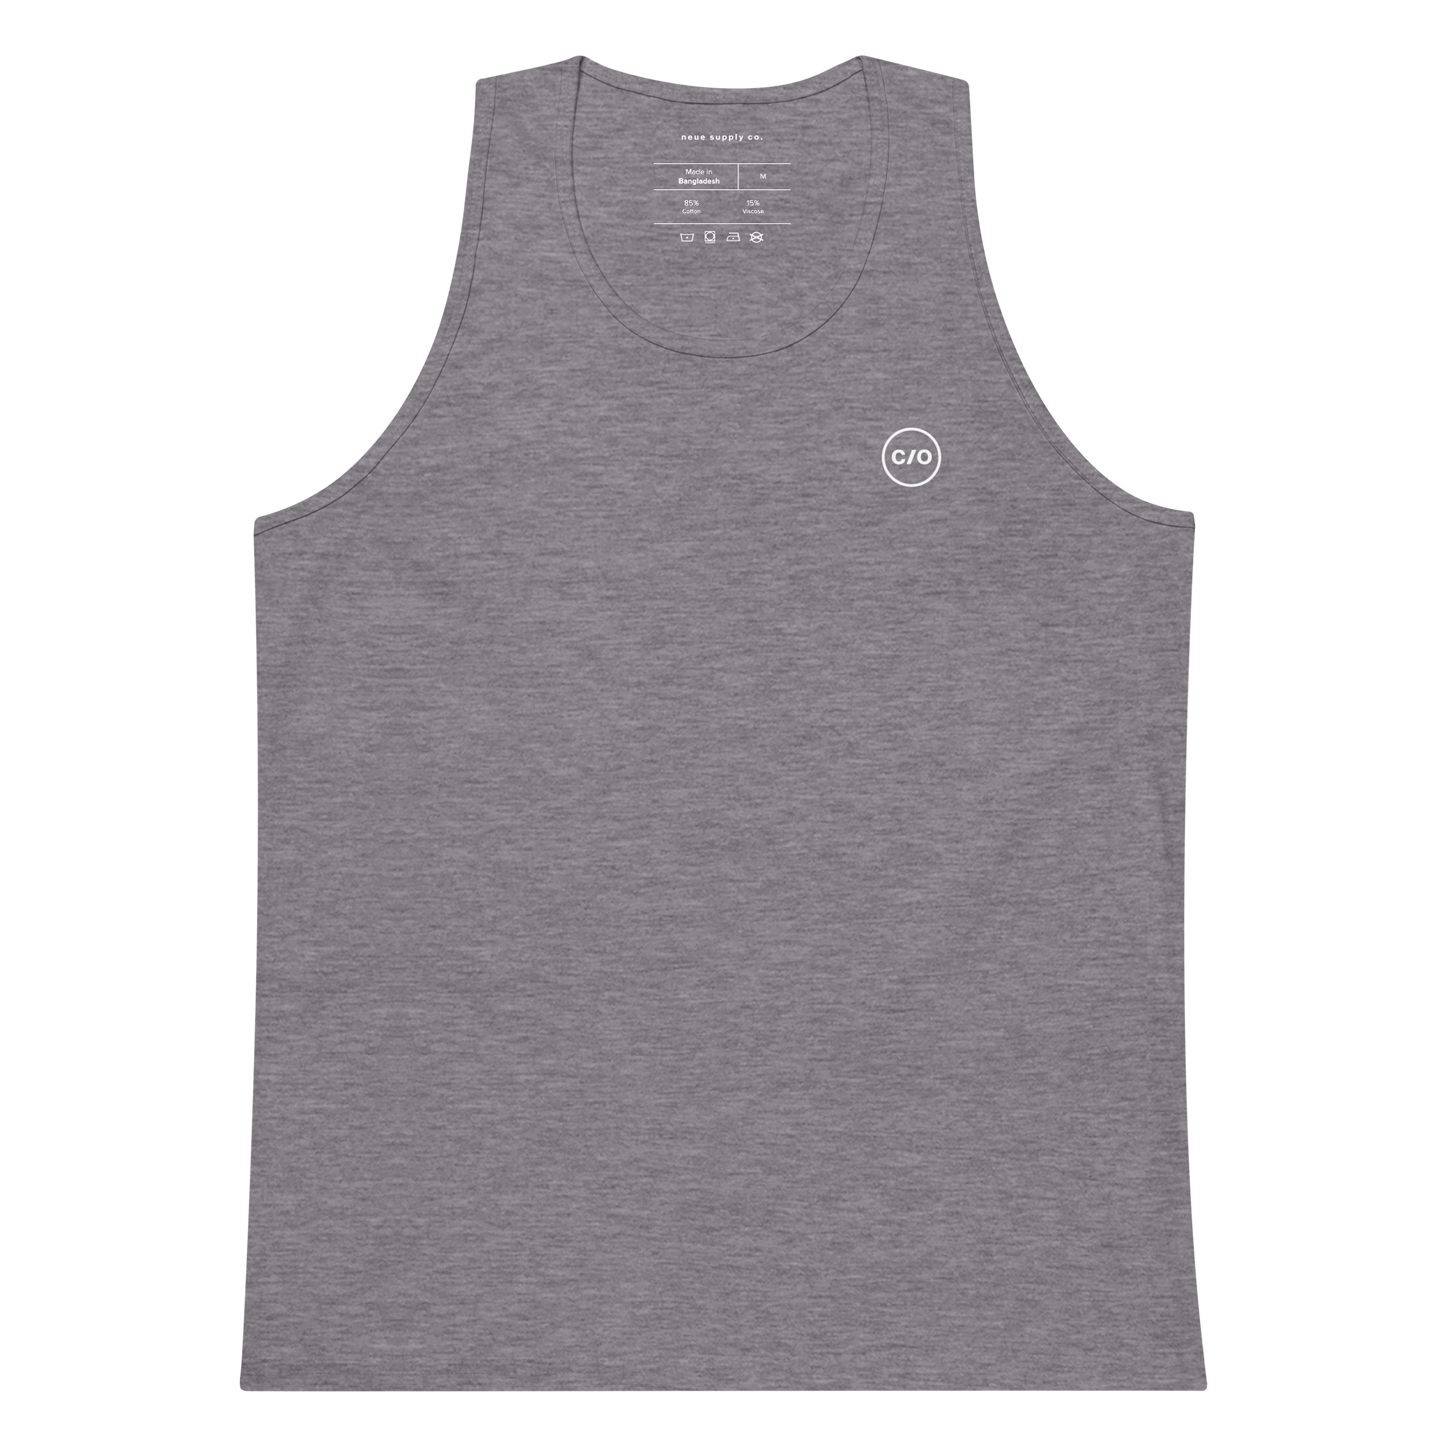 Neue Supply Co. Essential Workout Tank Top for Men in Athletic Heather Gray flat view